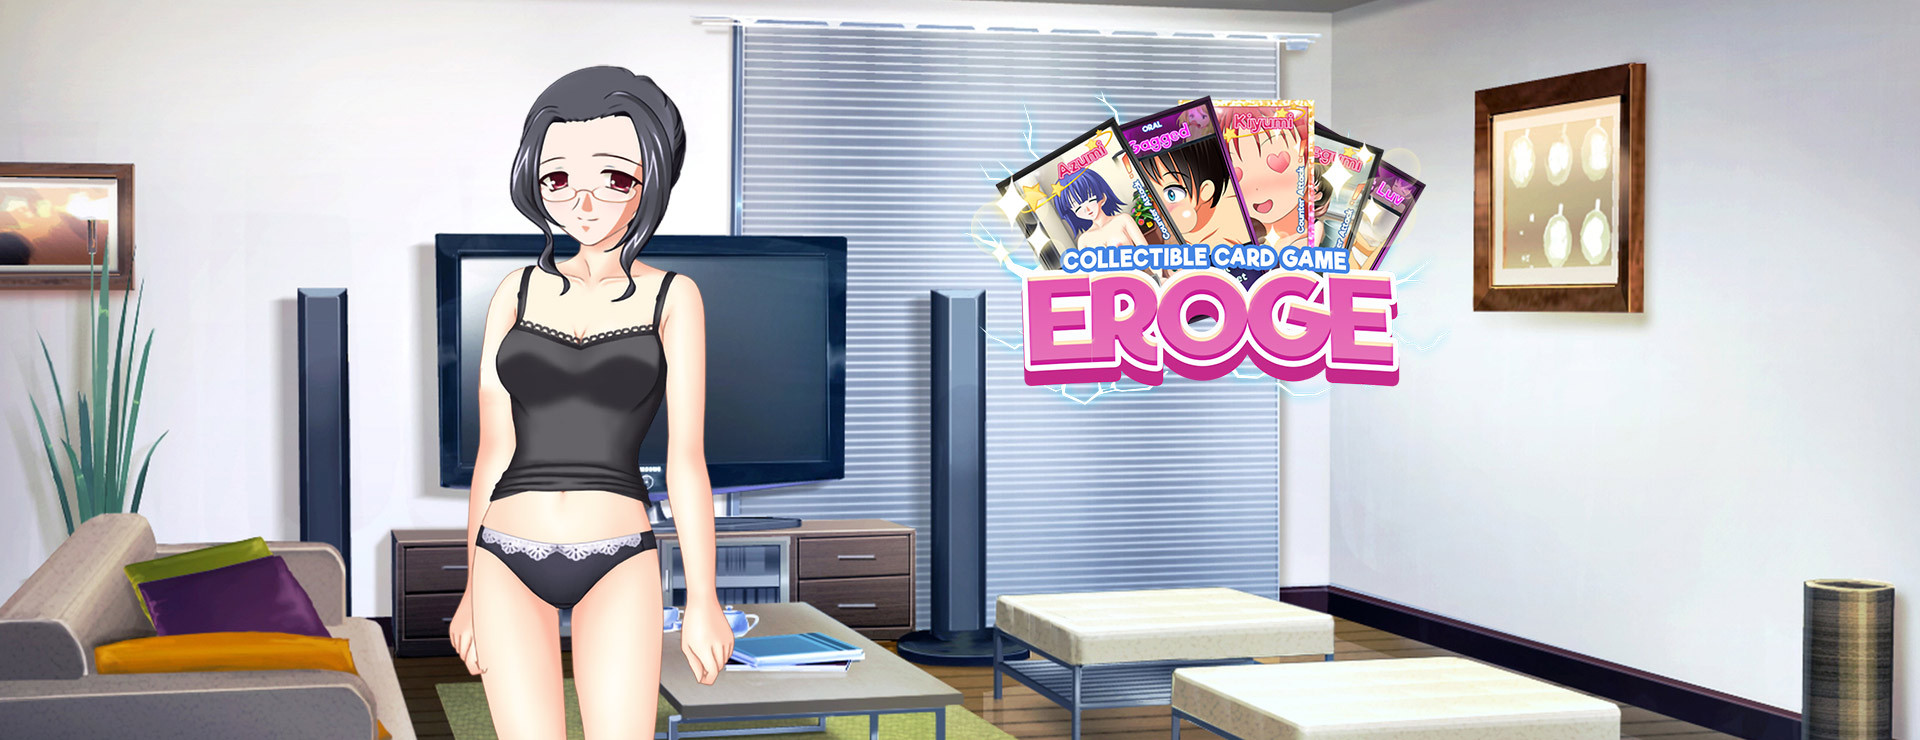 Collectible Card Game Eroge poster